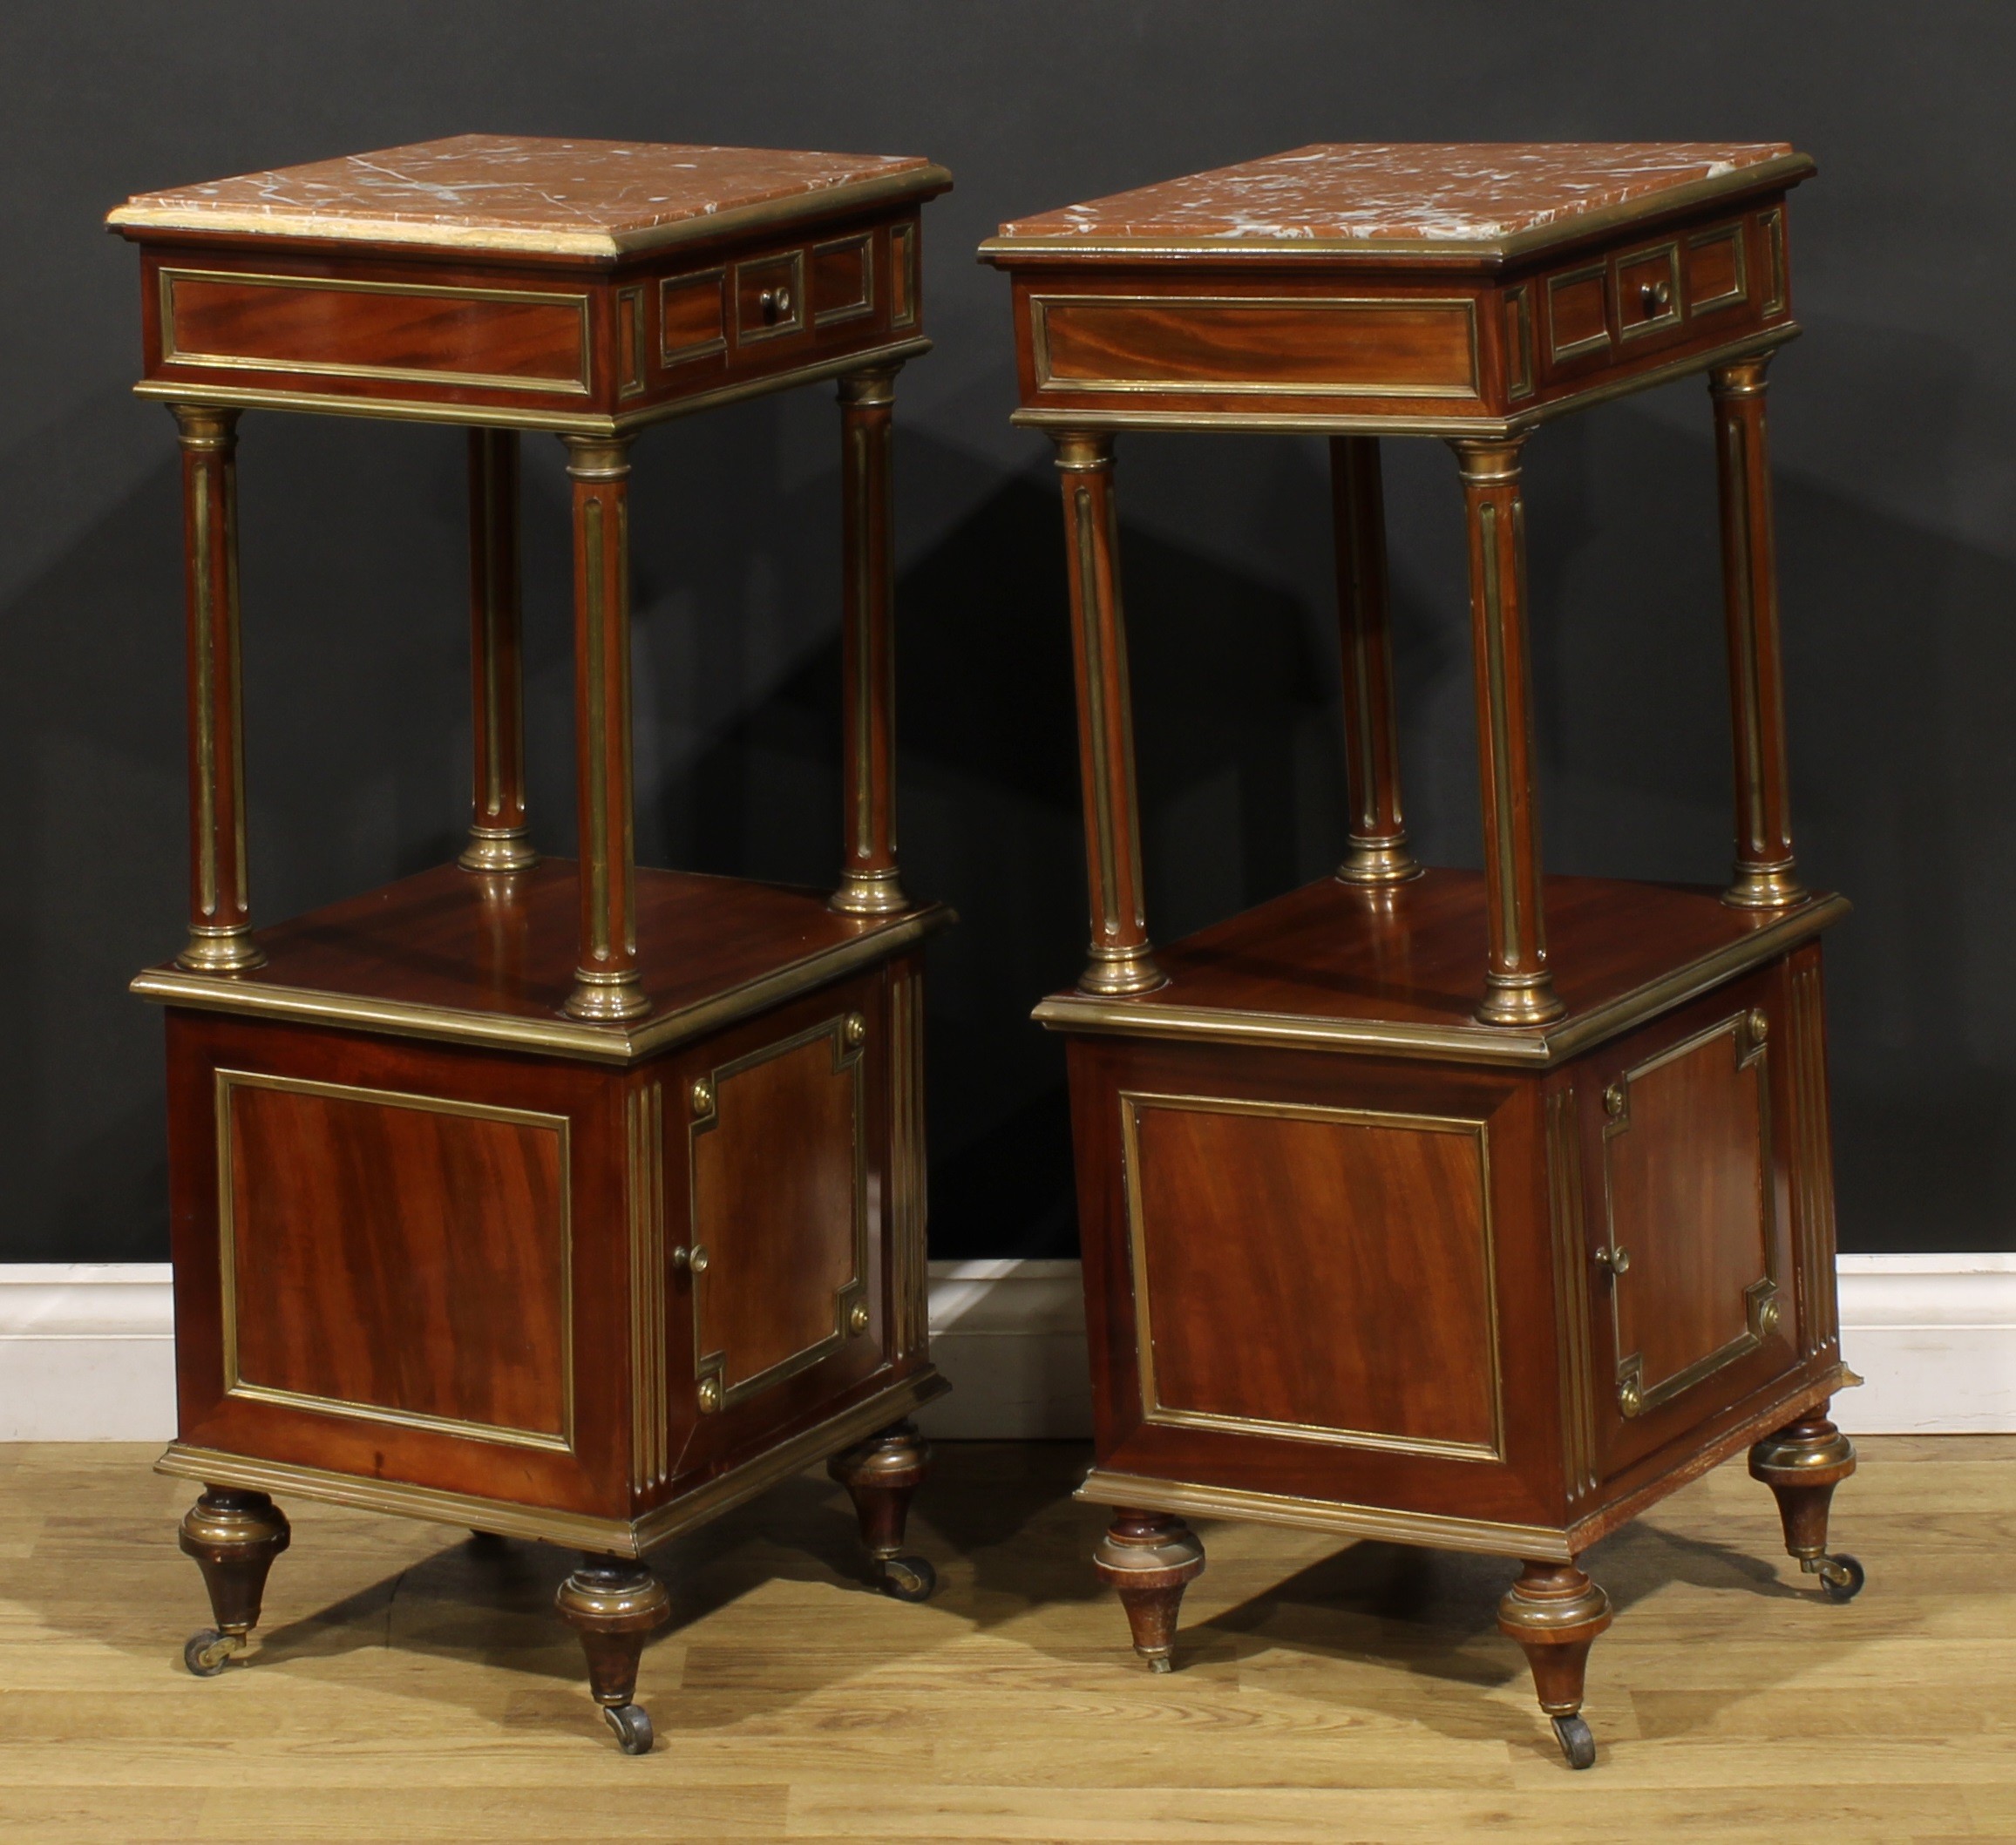 A pair of French Empire design Third Republic period brass mounted and parcel-gilt mahogany tables - Image 2 of 3